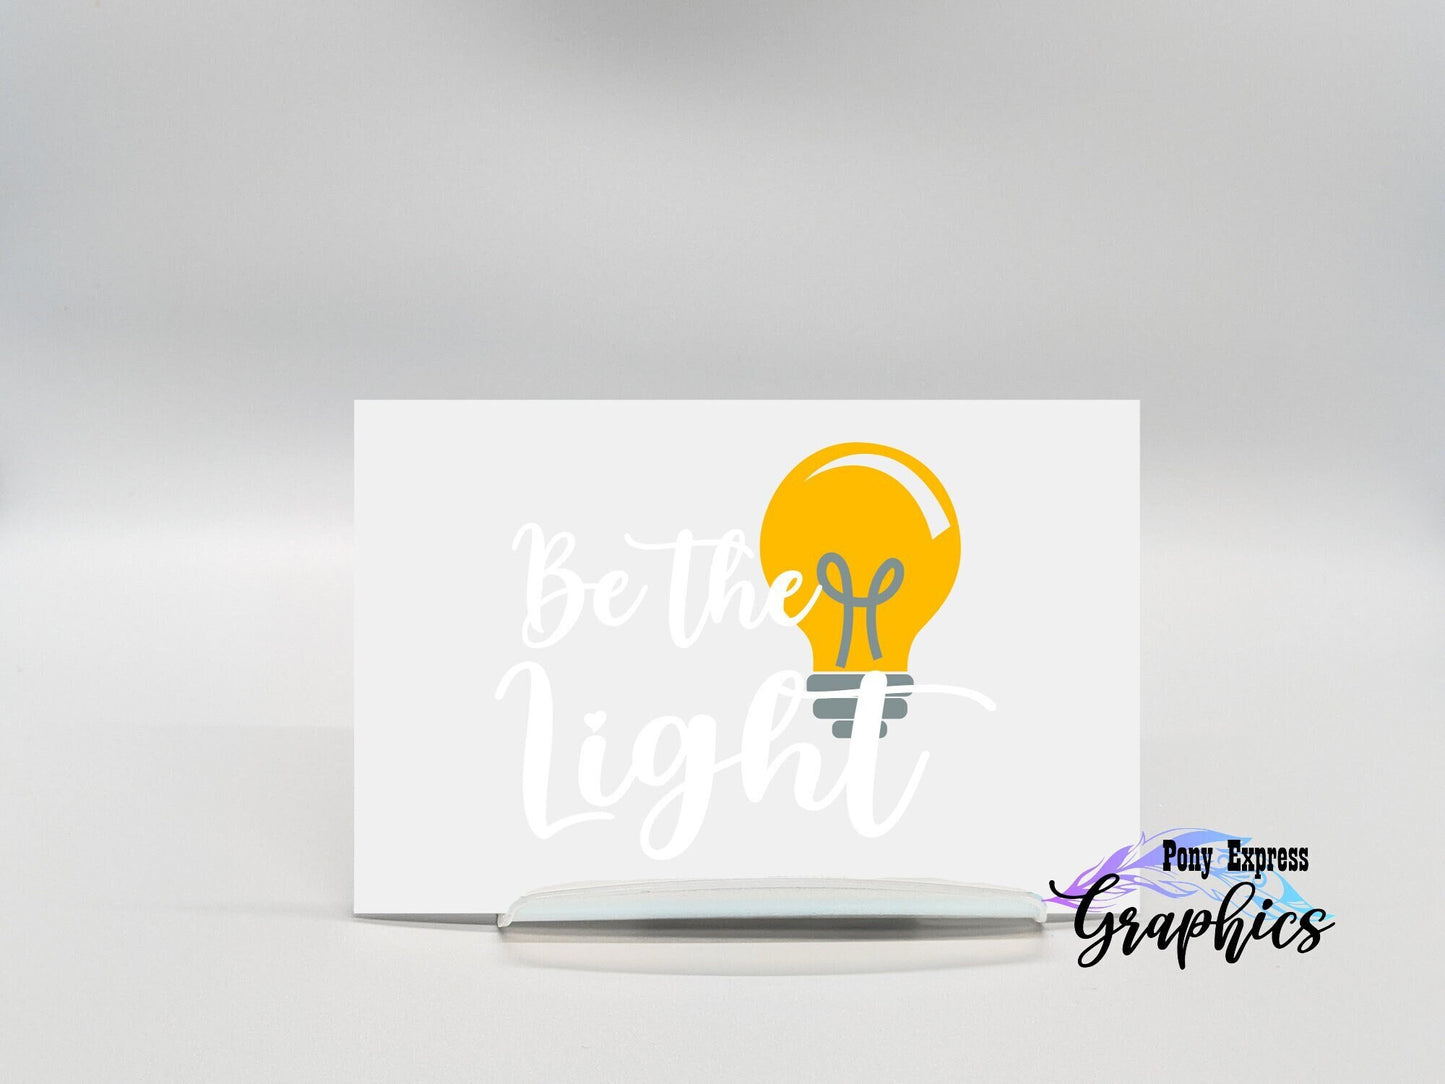 Be the Light Decal